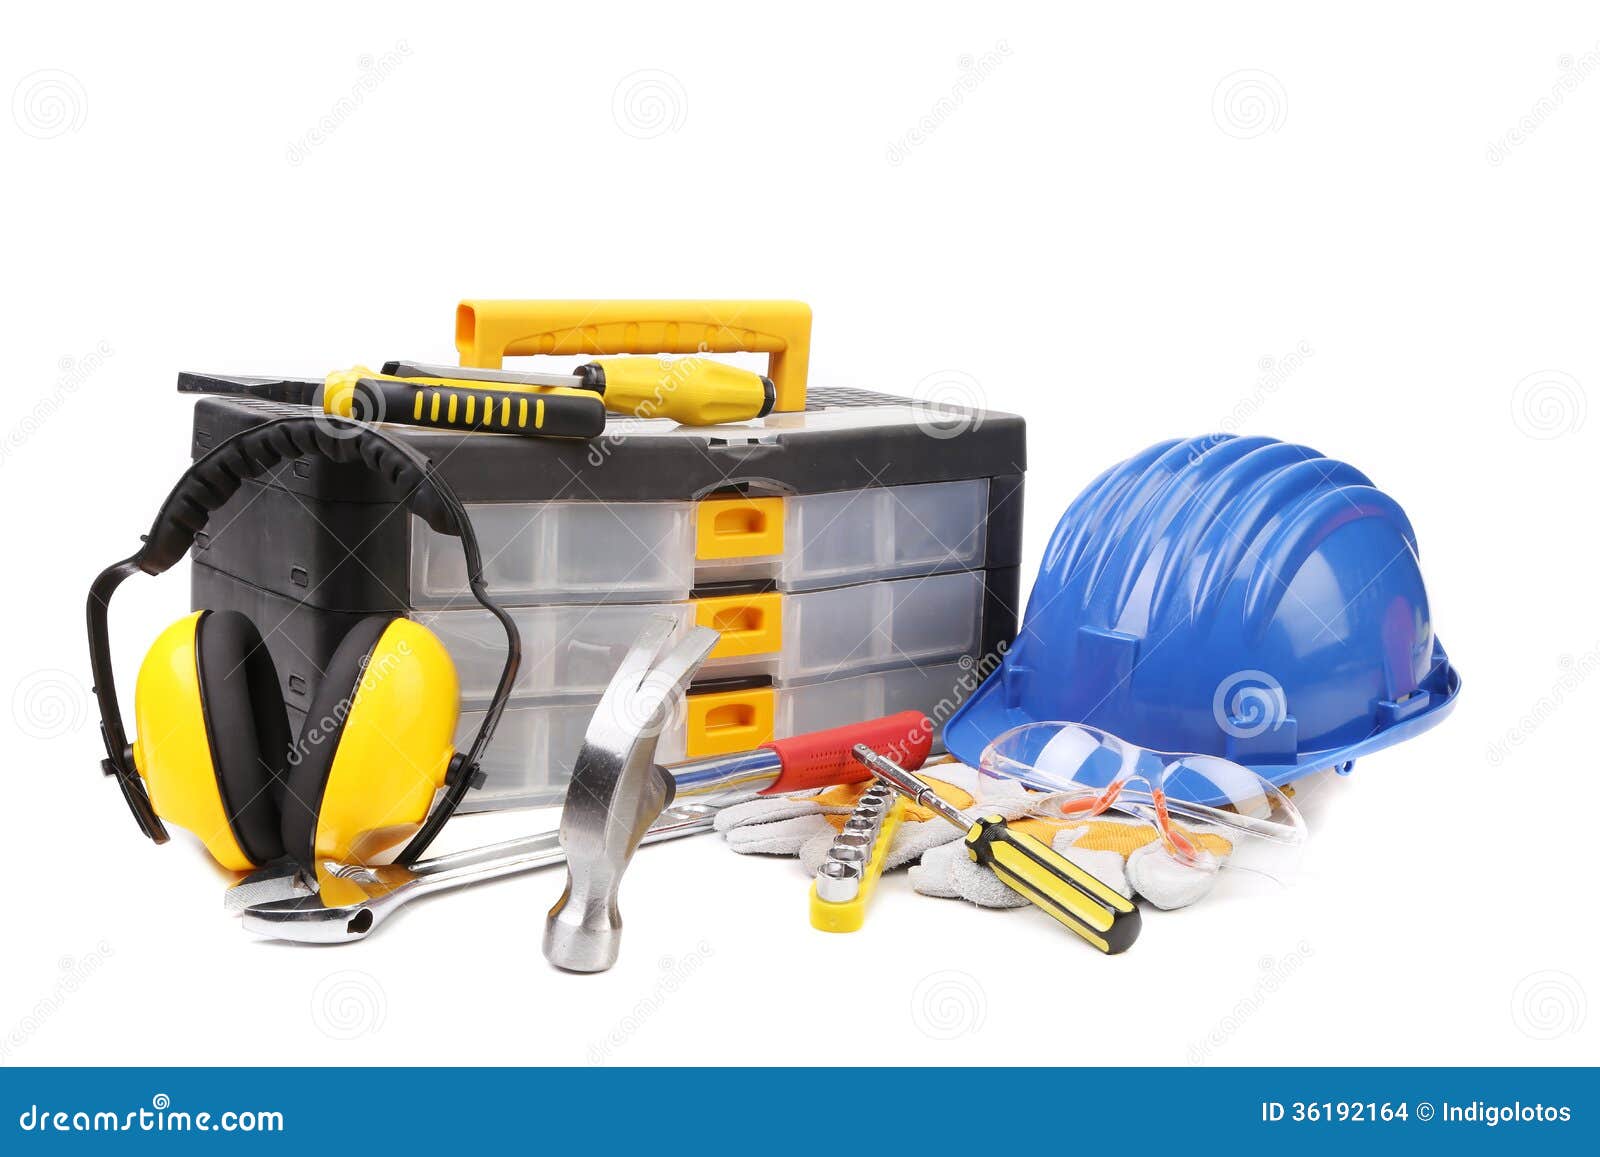 plastic workbox with assorted tools.